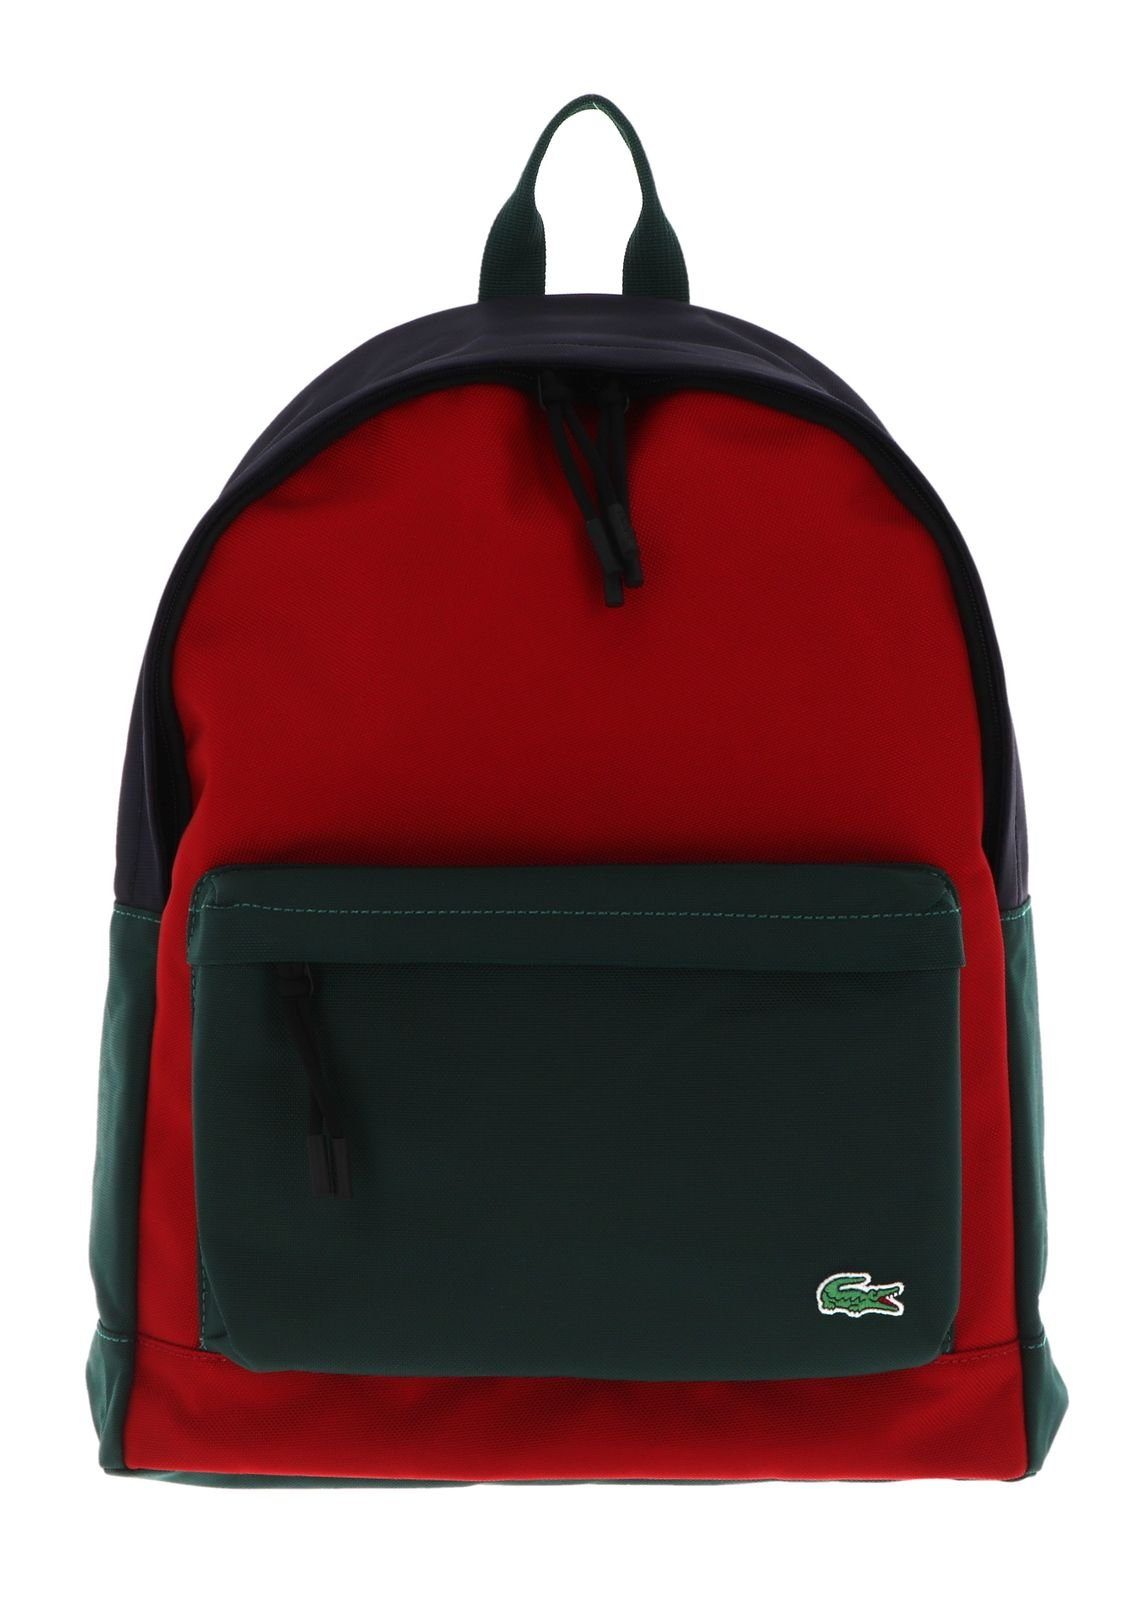 Lacoste Rouge Rucksack Abime Swing Package Holiday